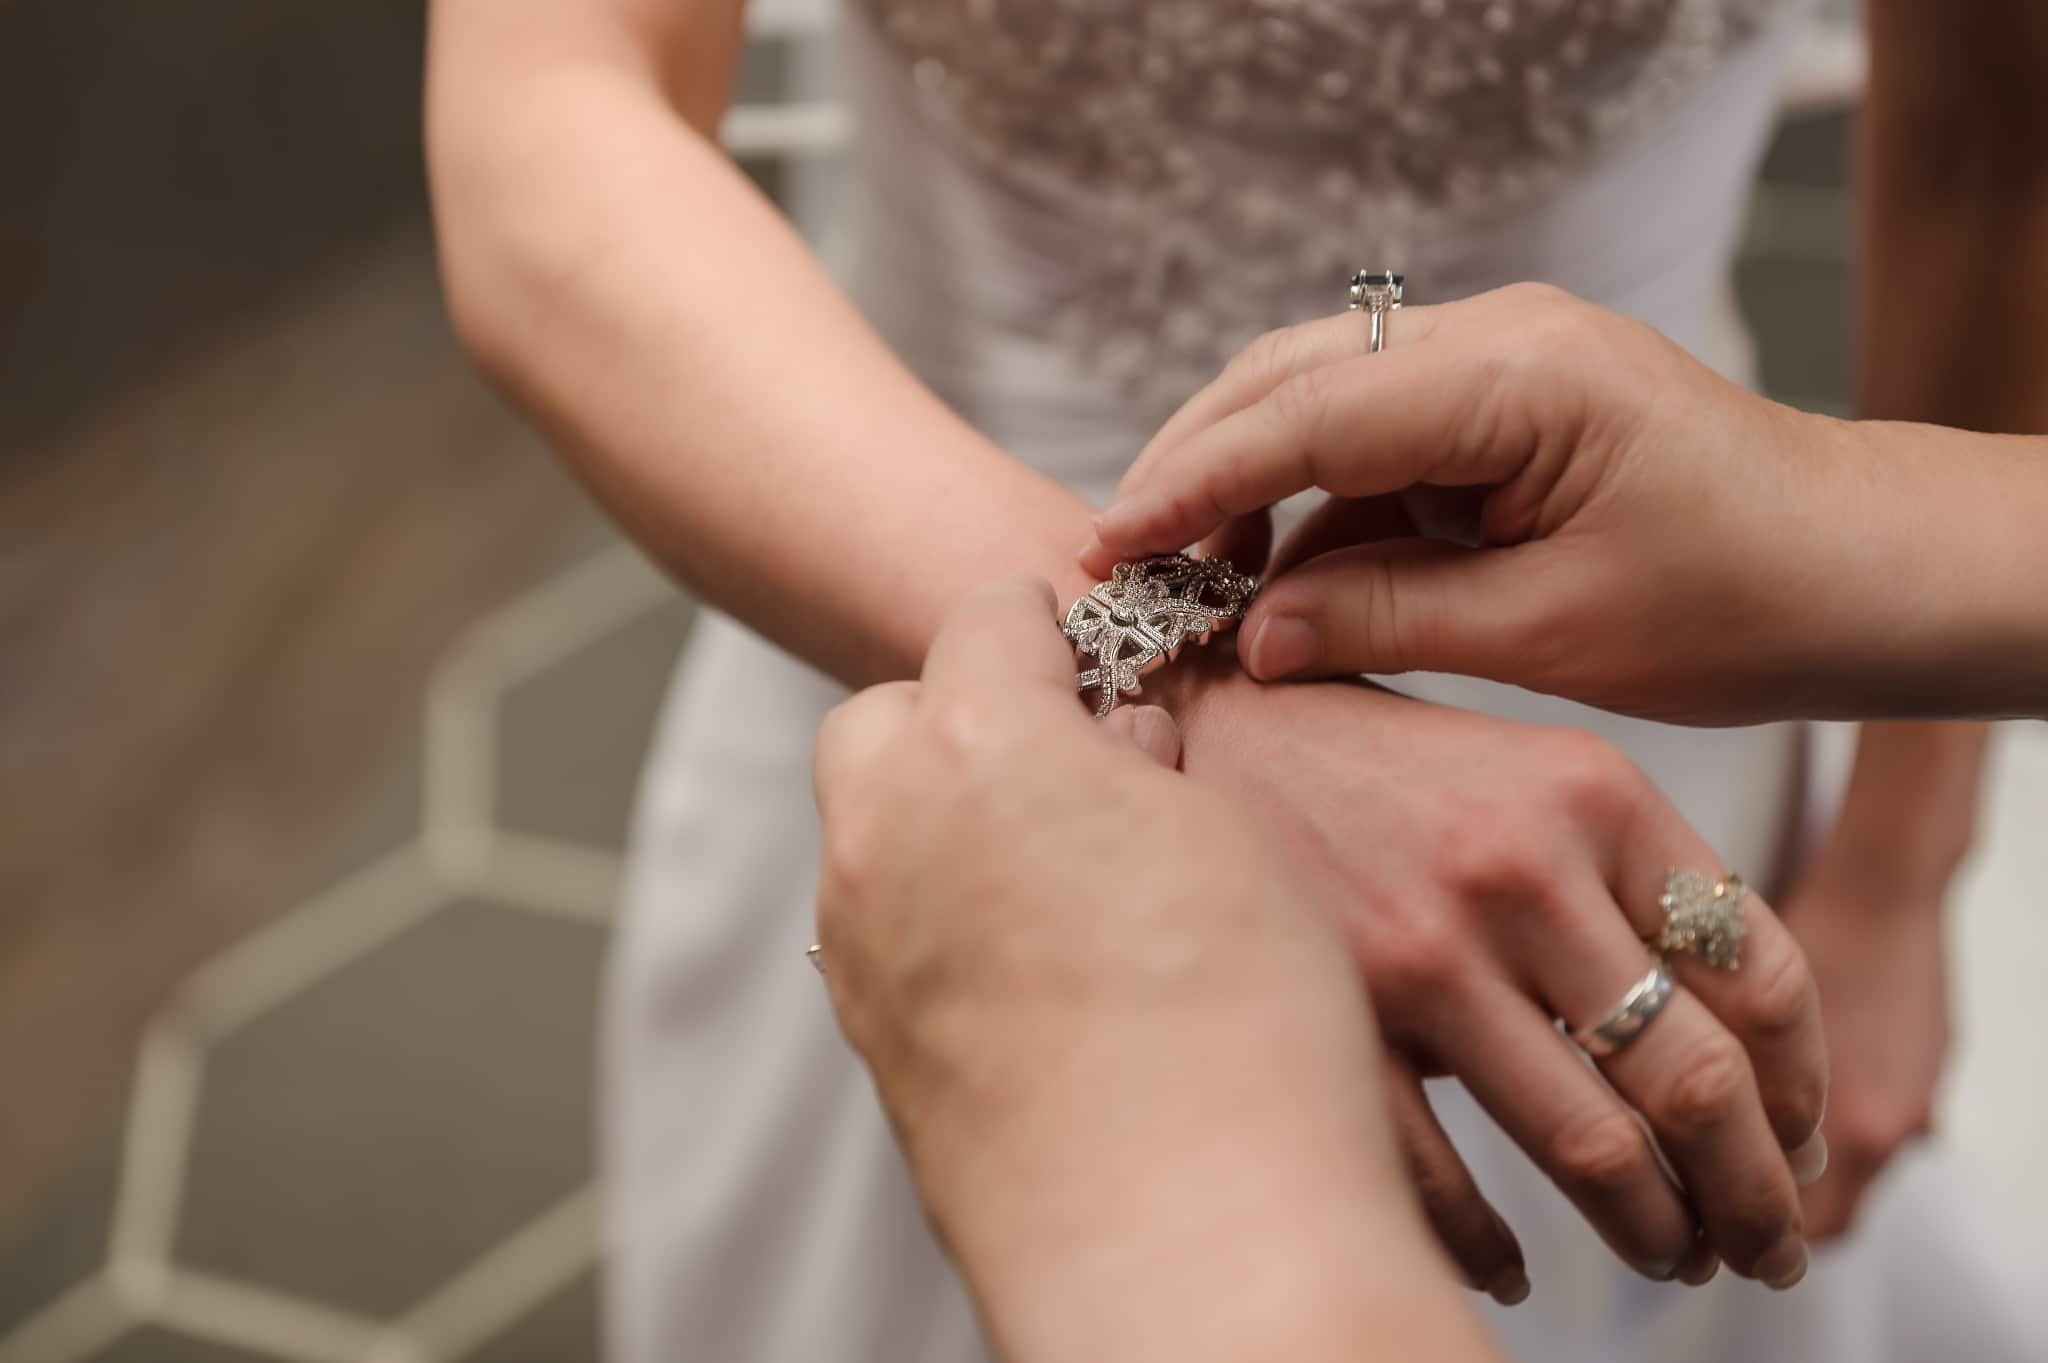 Ways to honor your mom at your wedding include borrowing heirloom bracelets like this one.